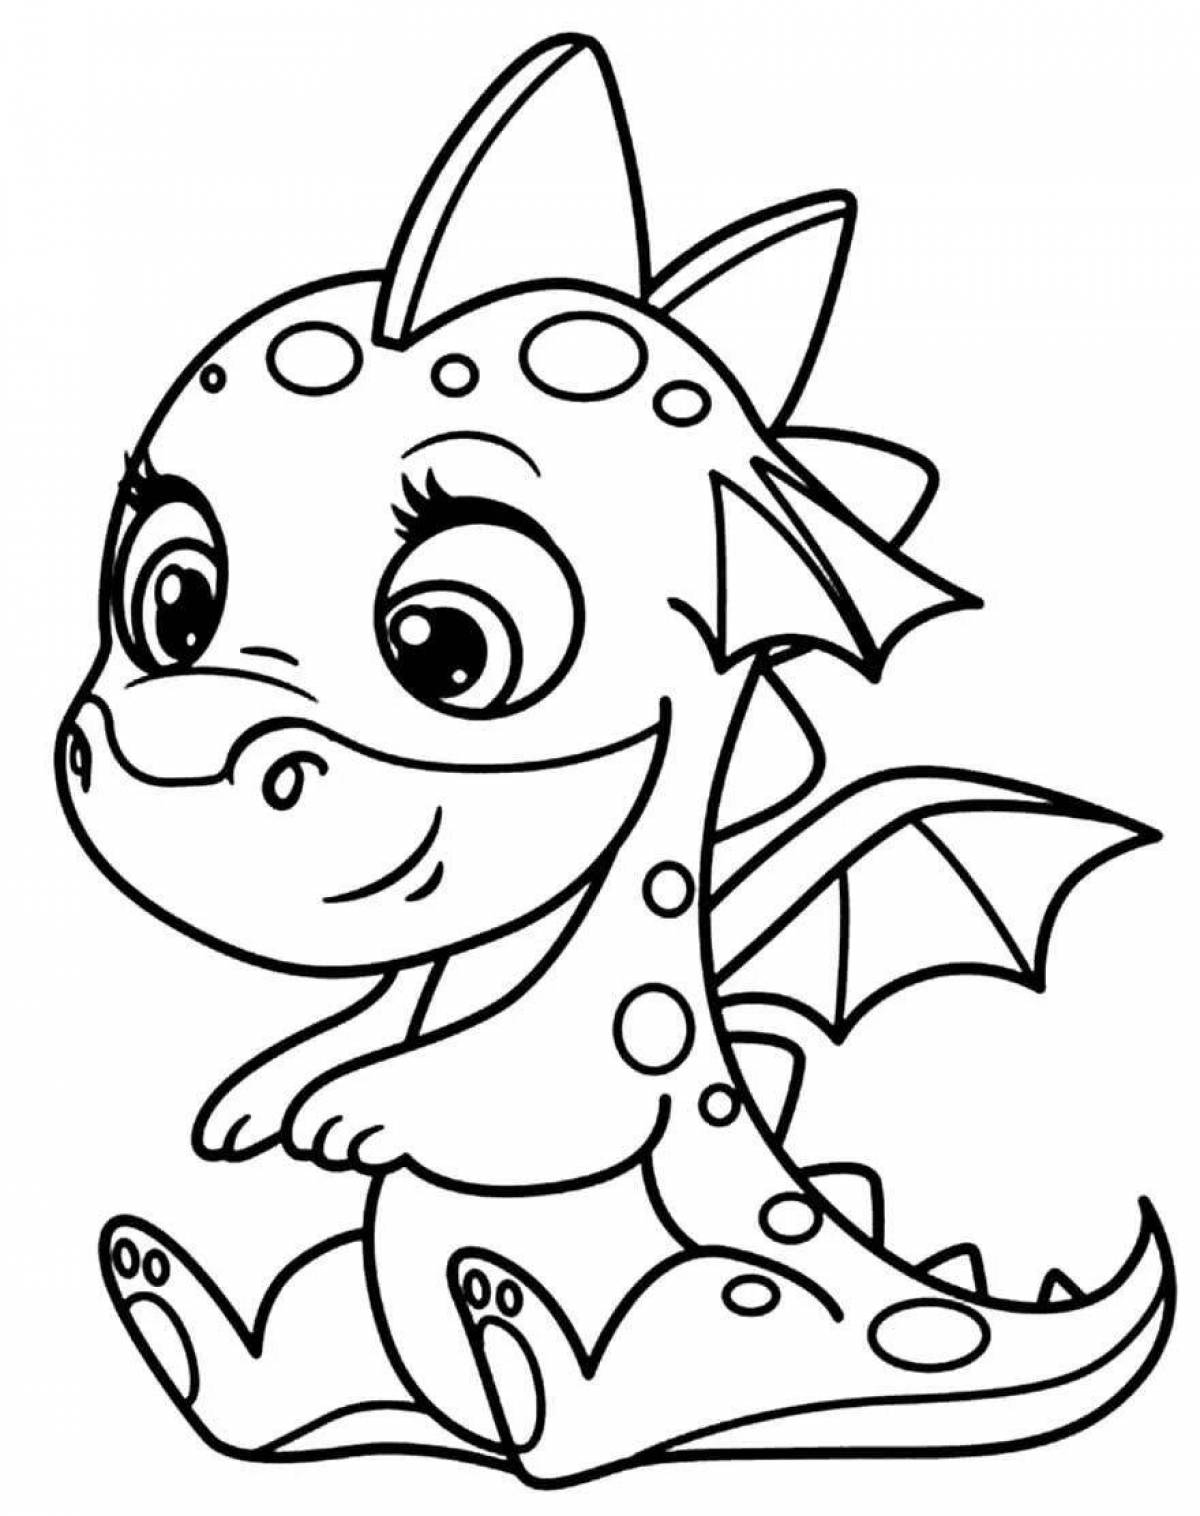 Great coloring dragons for kids